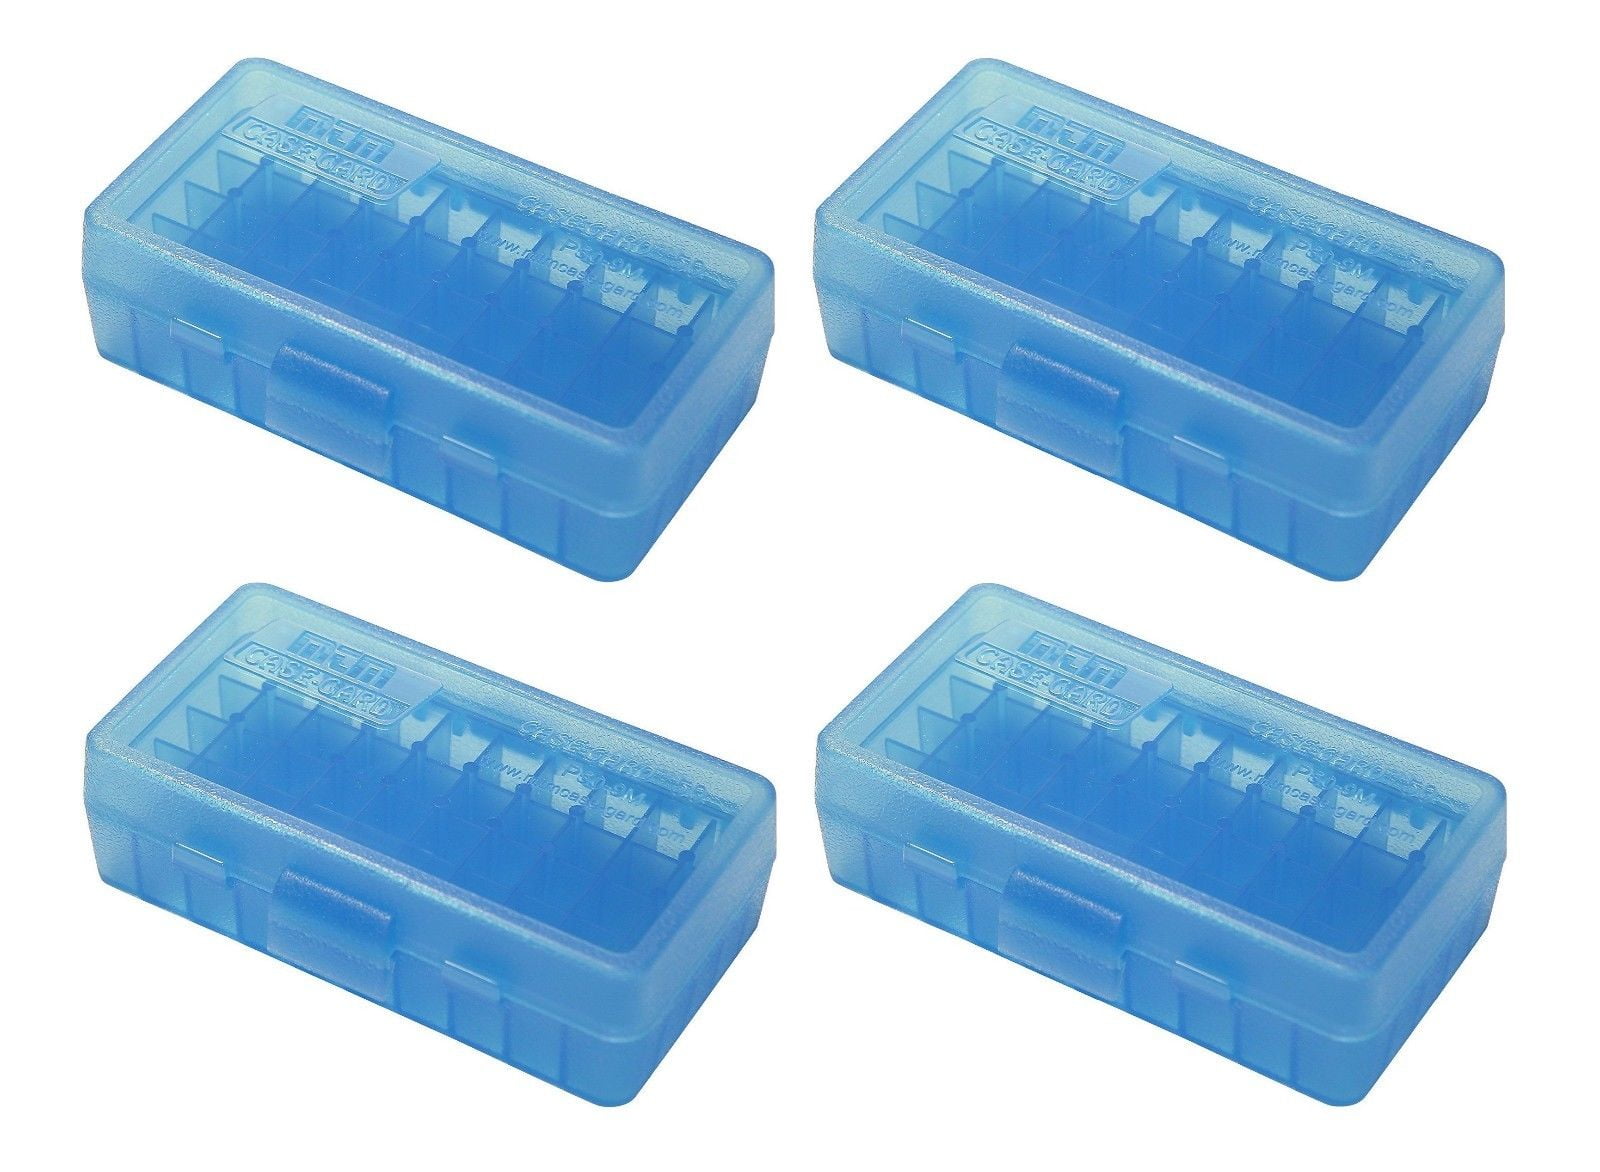 10 x 9mm/.380 Ammo Box Case Storage 50 Rnd Boxes BLUE COLOR BRAND NEW 